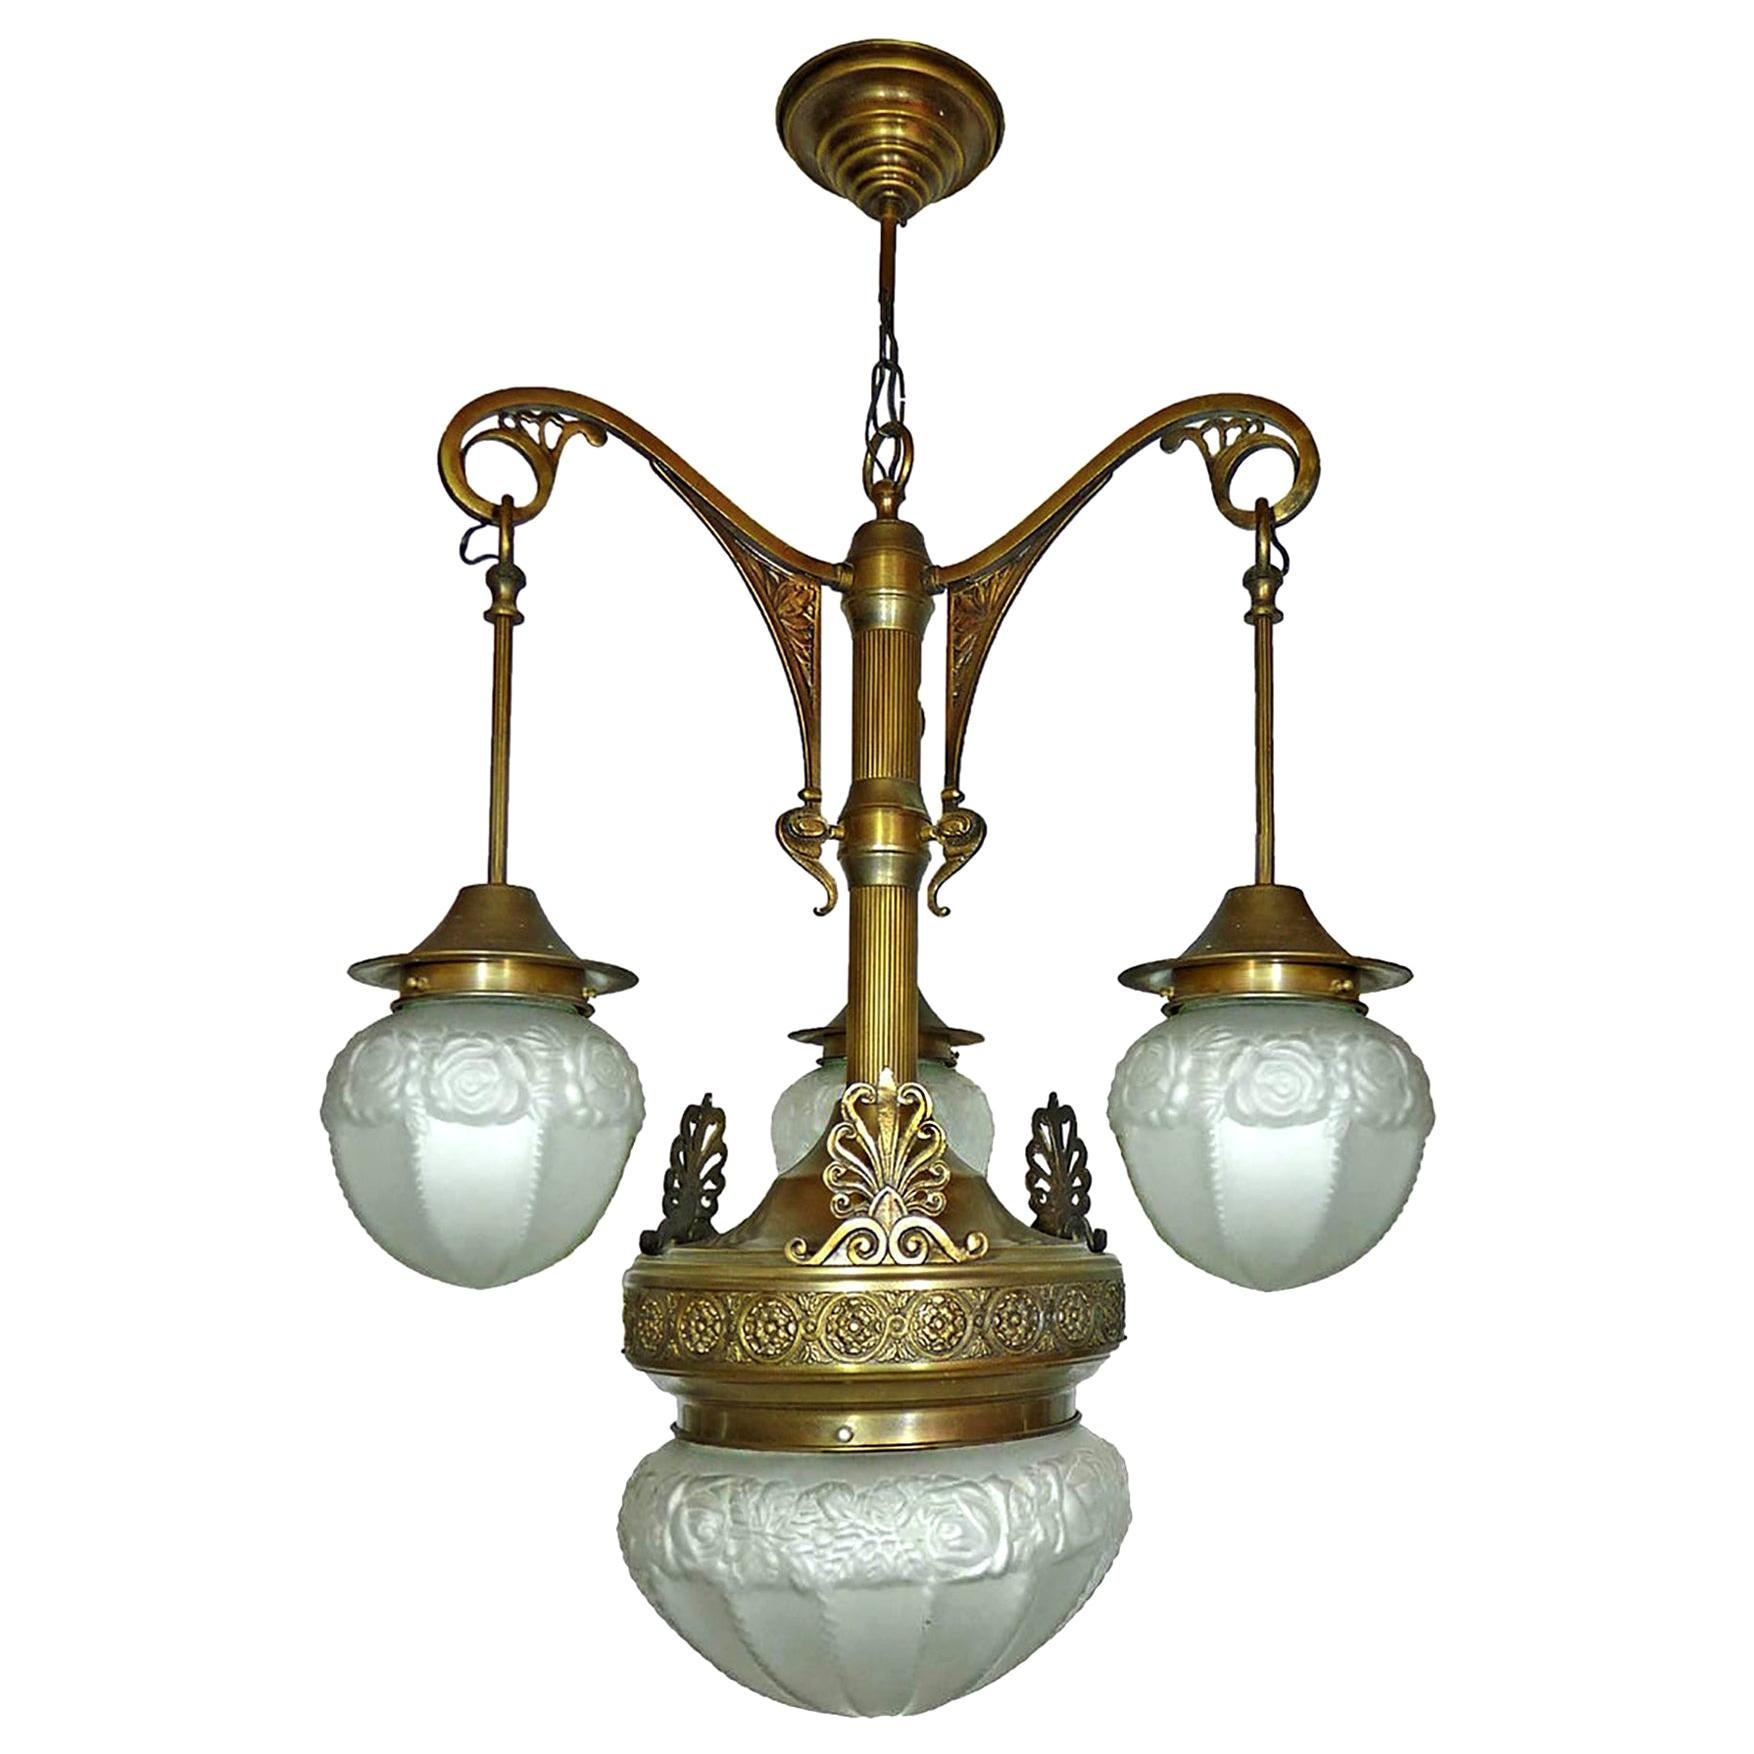 Fabulous French Art Deco Art Nouveau Brass Molded Frosted Glass Chandelier